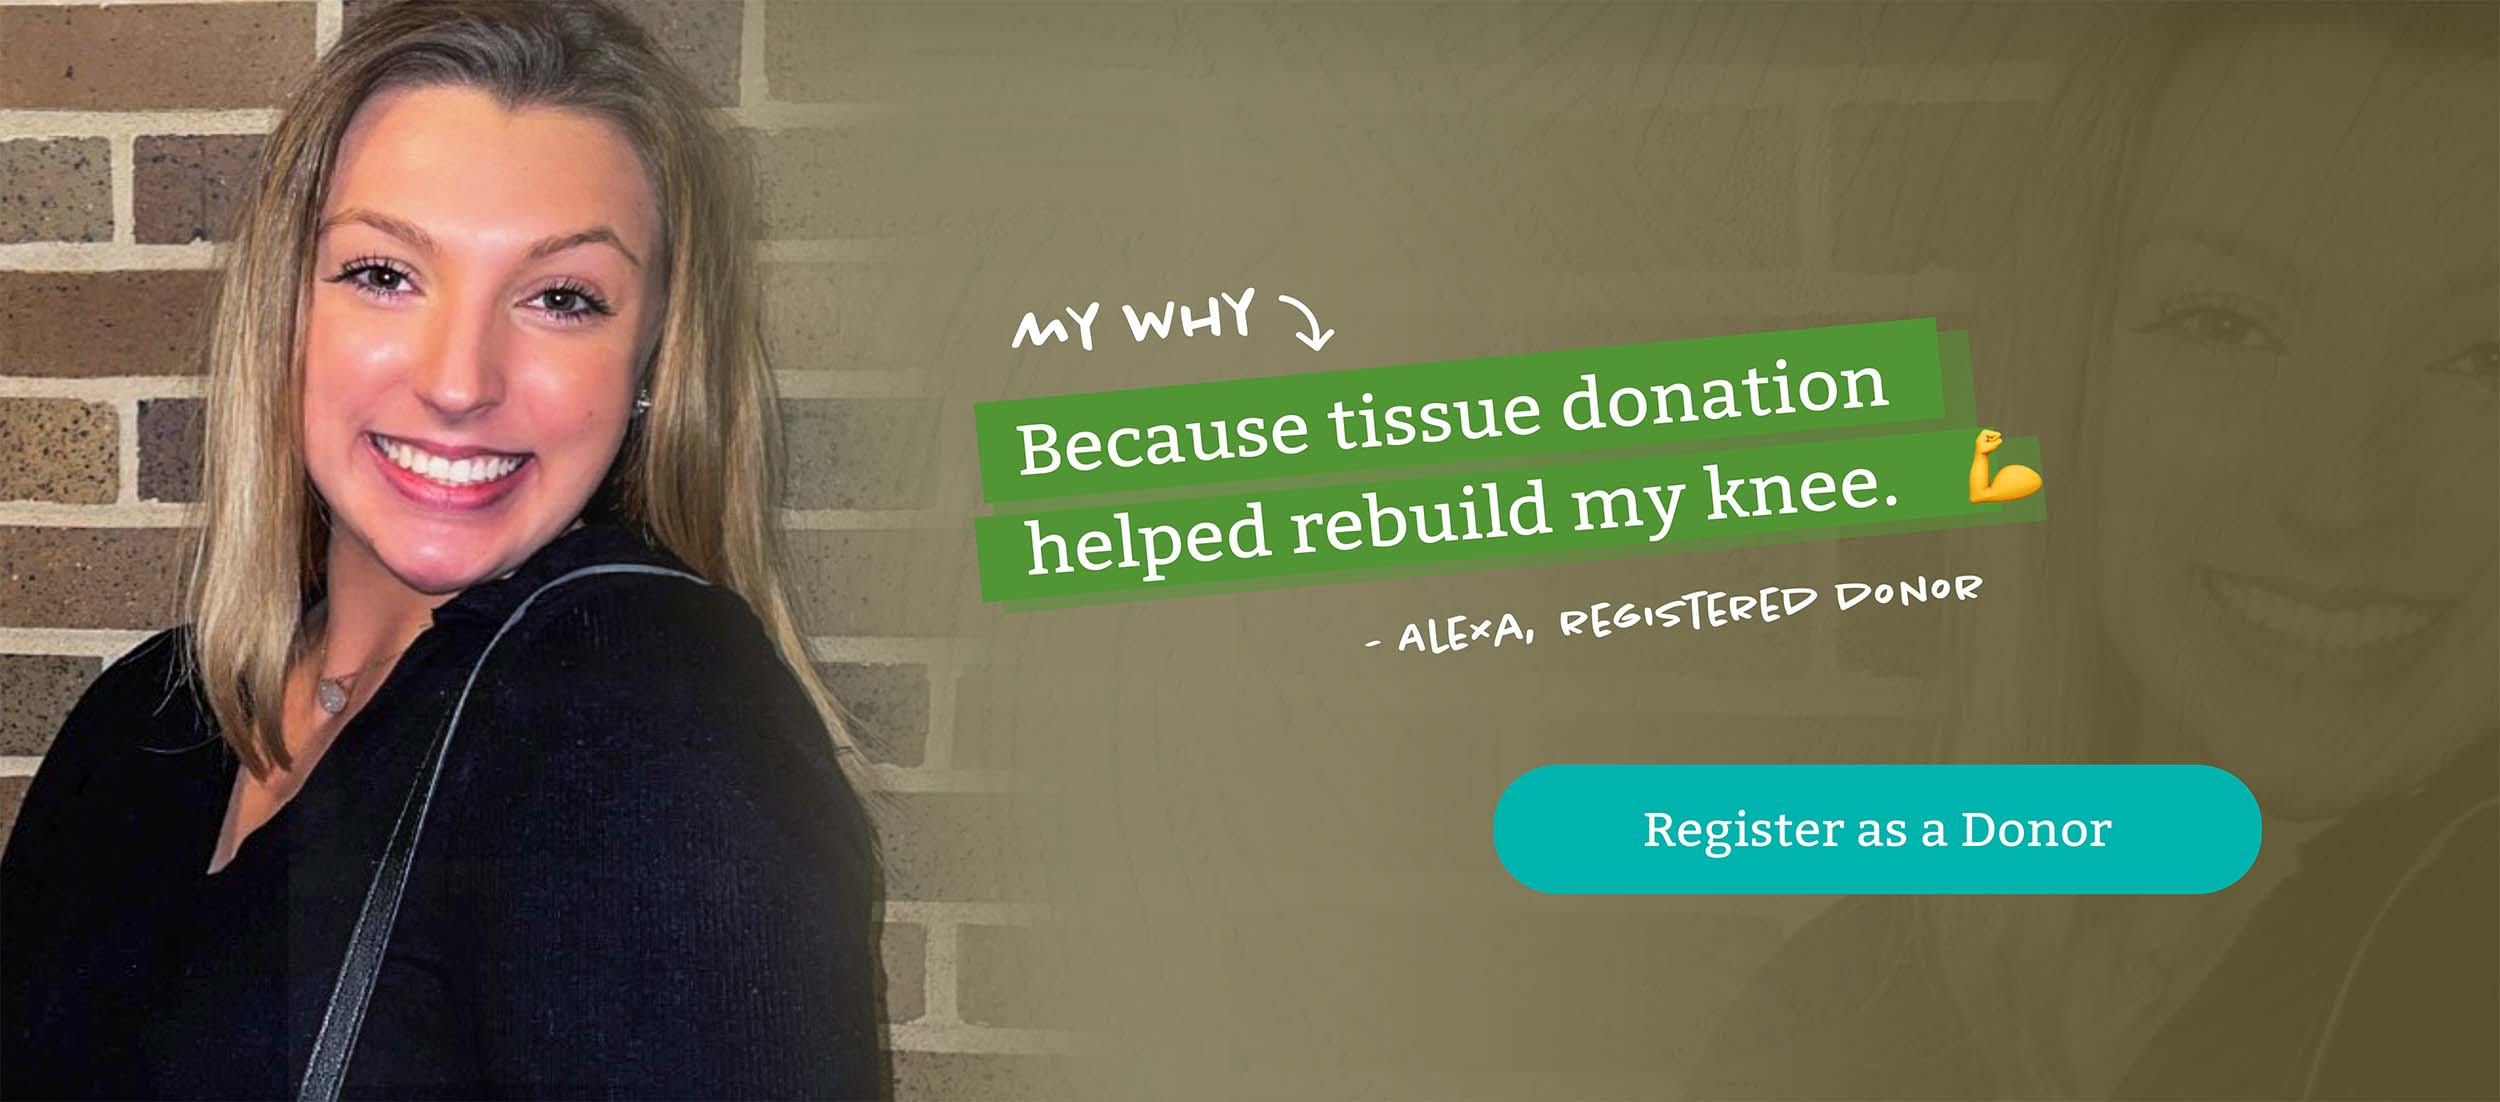 Register as a Donor